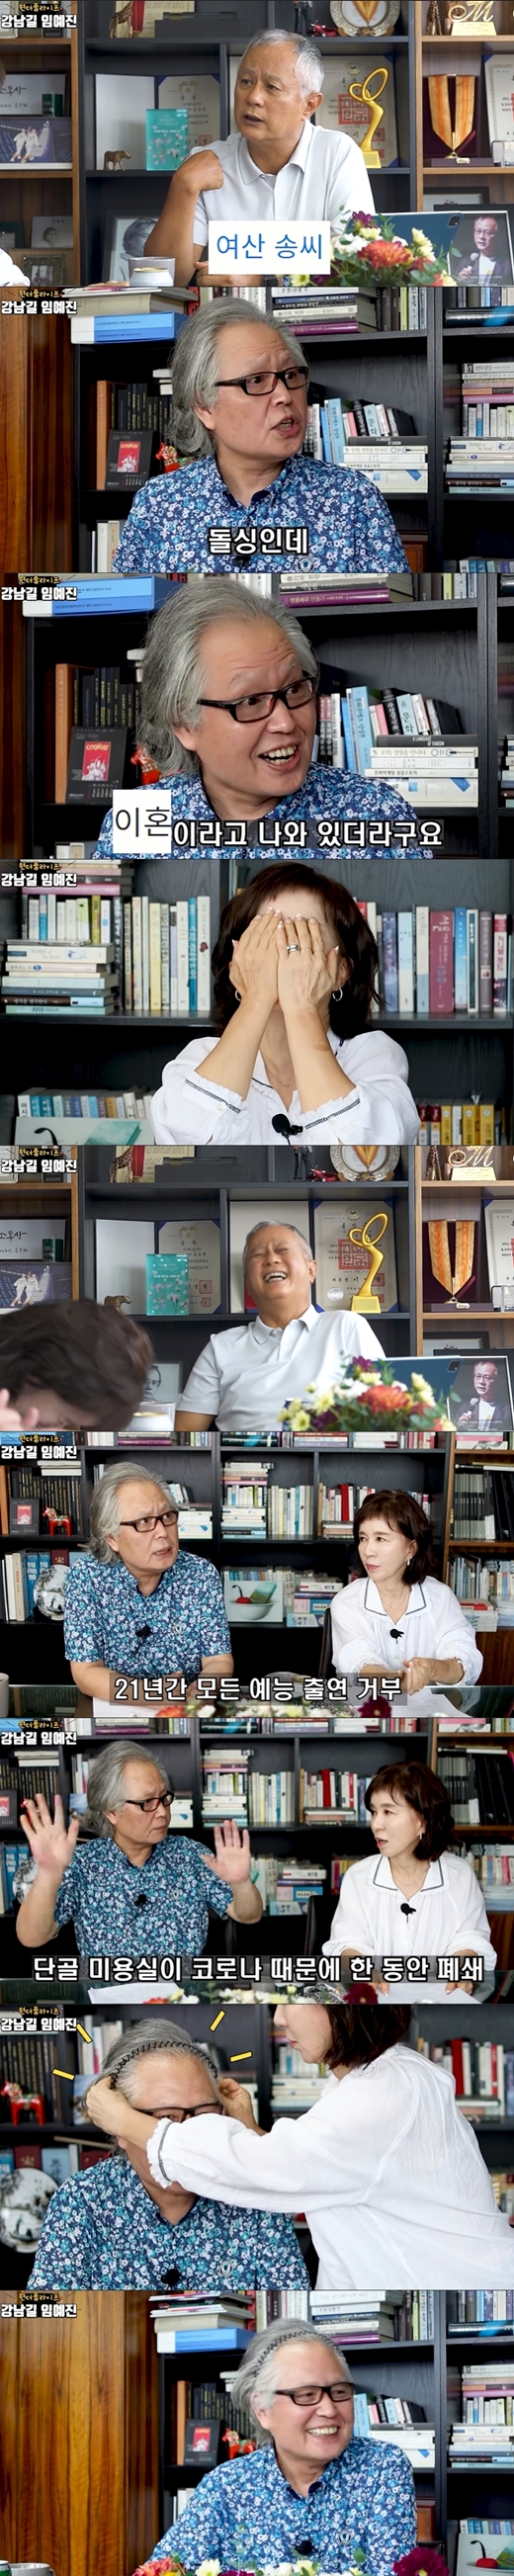 Actor Kang Nam-gil, 63, appeared on a non-Drama broadcast program for the first time in 21 years.Gangnam-gil recently appeared as an Actor Im Ye-jin (61) and guest on YouTube channel Song Seung-hwans The Soul-Mate Life, which is hosted by Actor Song Seung-hwan (64).Gangnam-gil is in close contact with Song Seung-hwan and Im Ye-jin, and Song Seung-hwans The Soul-Mate Life has been releasing Gangnam-gil and Im Ye-jin in several times since last month.Gangnam-gil appeared as a long white-haired head and attracted attention. The reason for growing his hair with long hair was that he had a confirmed person in the beauty salon about a year ago and closed the door.Gangnam-gil mentioned the occasion of Song Seung-hwans The Soul-Mate Life and said, After going to England as a family, I did not interview any pros for 21 years, except Drama.I did not perform, he said. I wanted to live in The Soul-Mate Life. In the broadcast, Gangnam-gil and Im Ye-jin had time to check their Internet profiles and correct the wrong information. Gangnam-gil said, I am a dolsing, but it is a divorce.I have to correct that, he said, making Song Seung-hwan and Im Ye-jin laugh.Gangnam-gil recalls the days when he lived in England with his children and said, I think now, there are many things like repatriation, but I have taken about 100 movies with my children.I had a hard time, but after four years, I want to be so precious. 